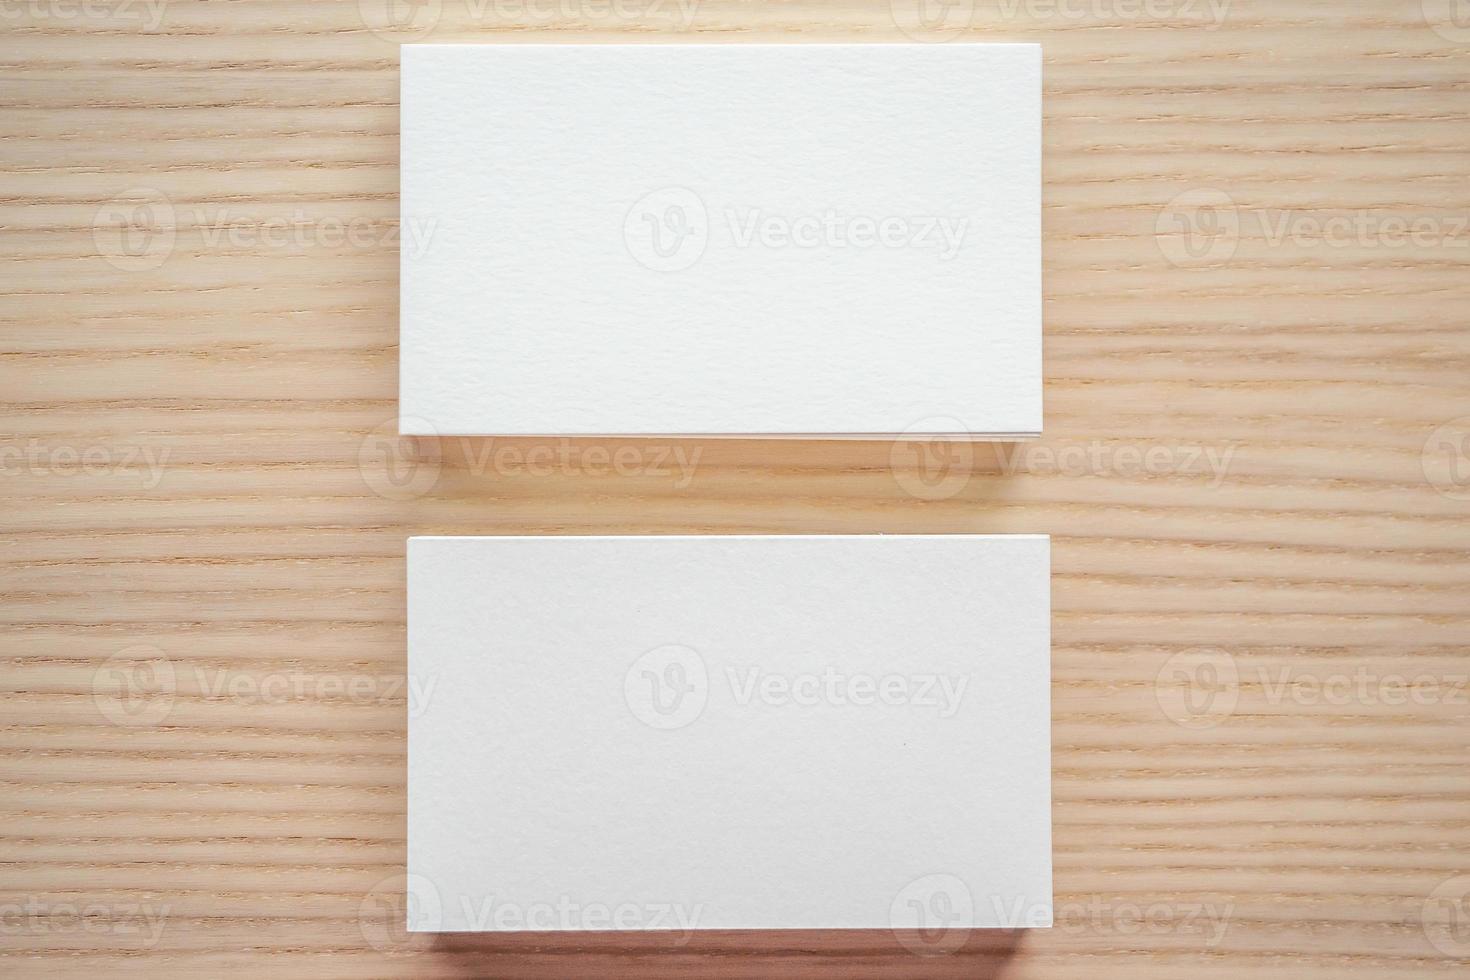 White business card on wood table background photo